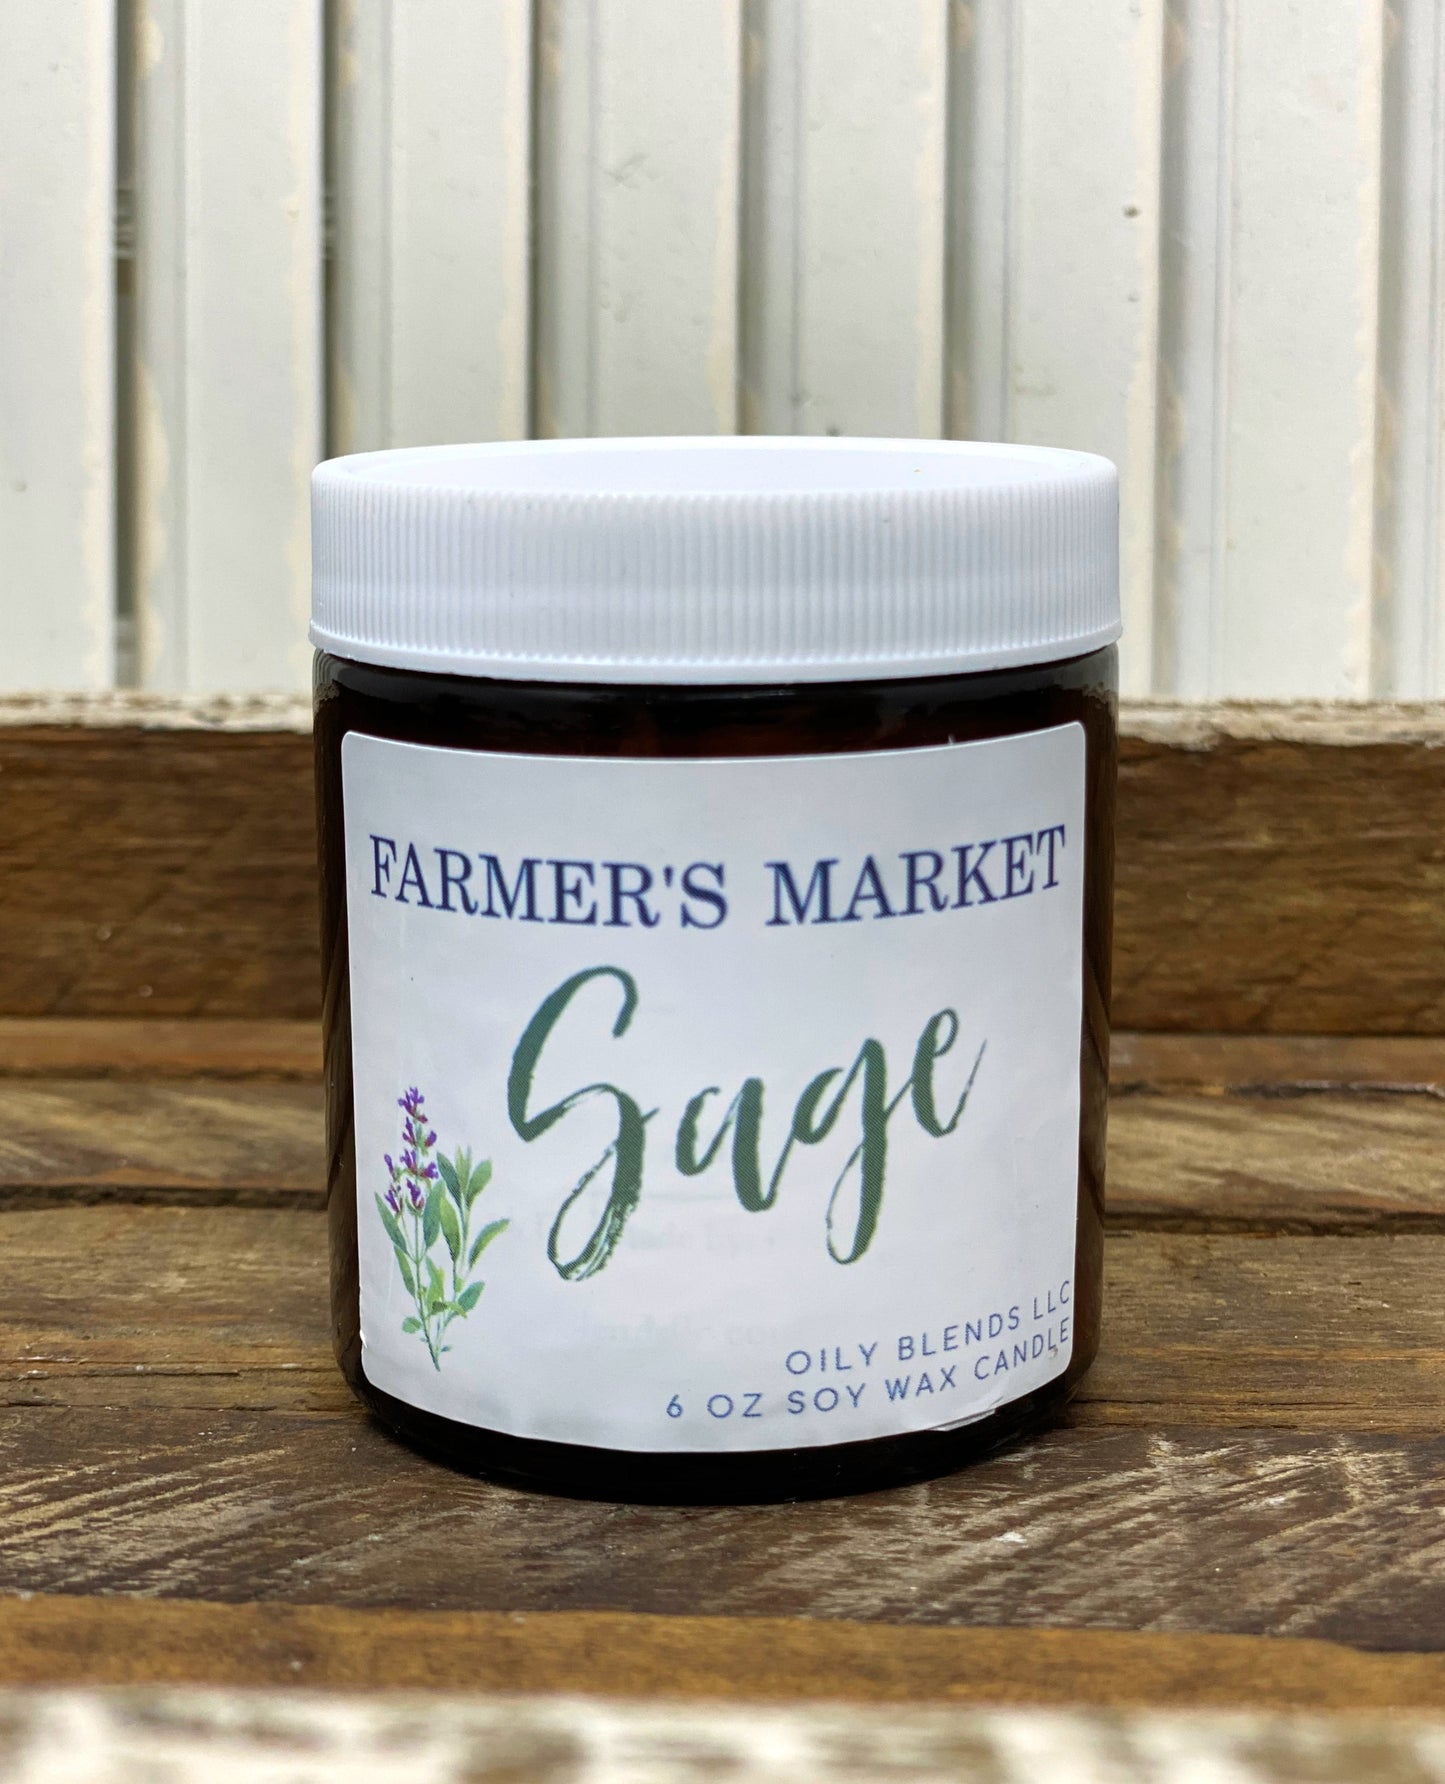 Farmer's Market Candles - 25 Hour Burn Time Soy Wax Candles